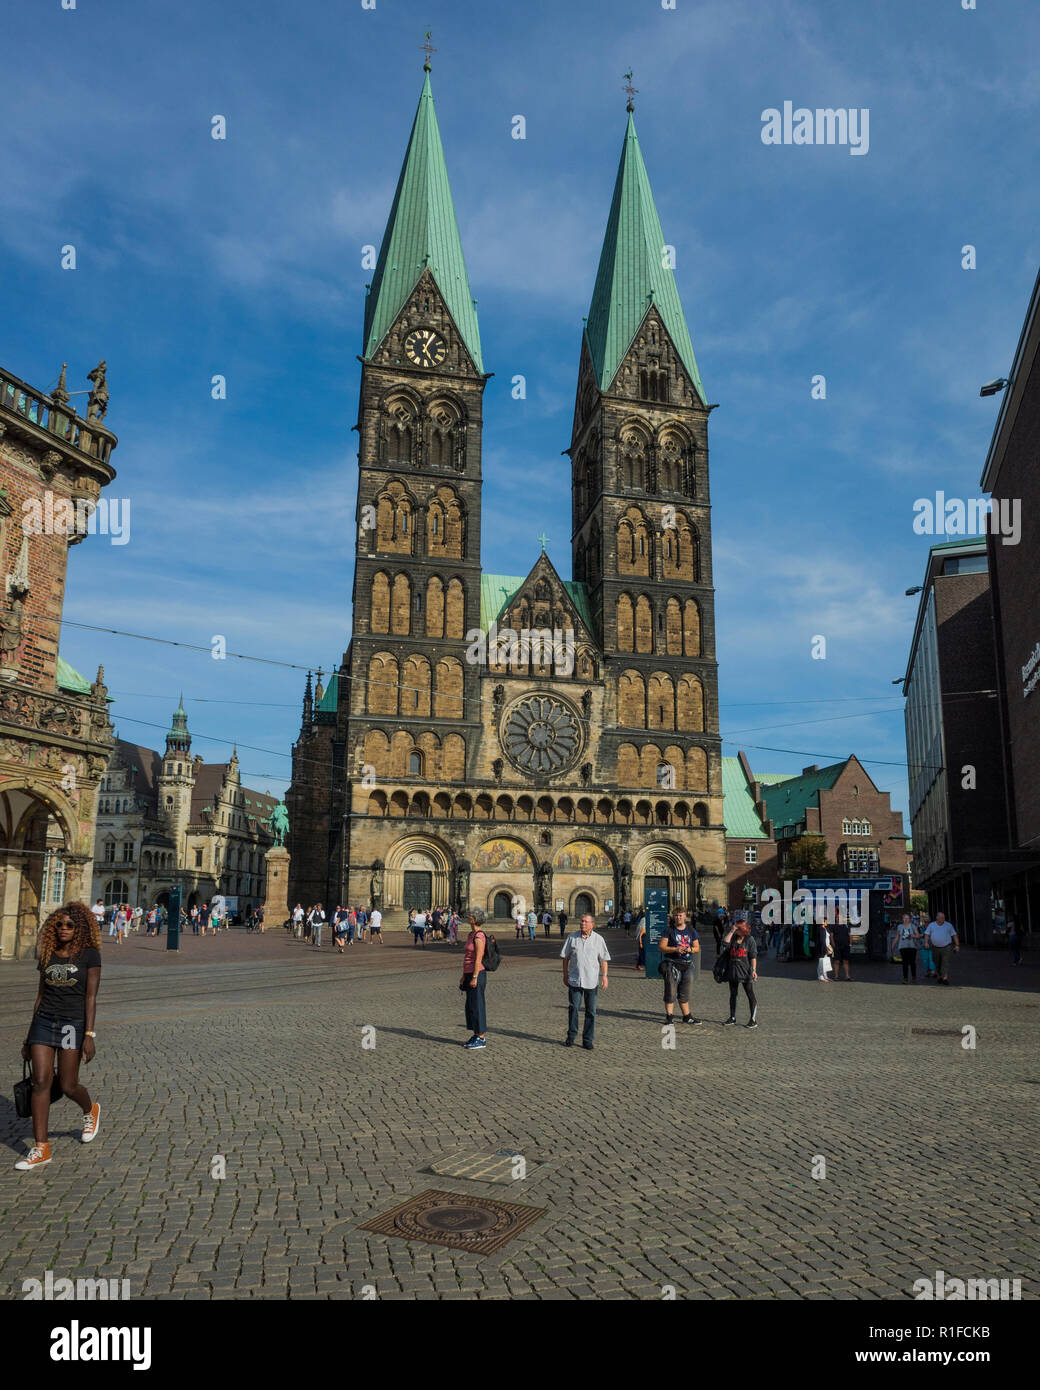 Marktplatz, Bremen. Deutschland Germany.  A scene looking across the market square towards the medieval church.  It's a sunny day so there are many tourist holiday makers out exploring and enjoying the sunshine. Stock Photo